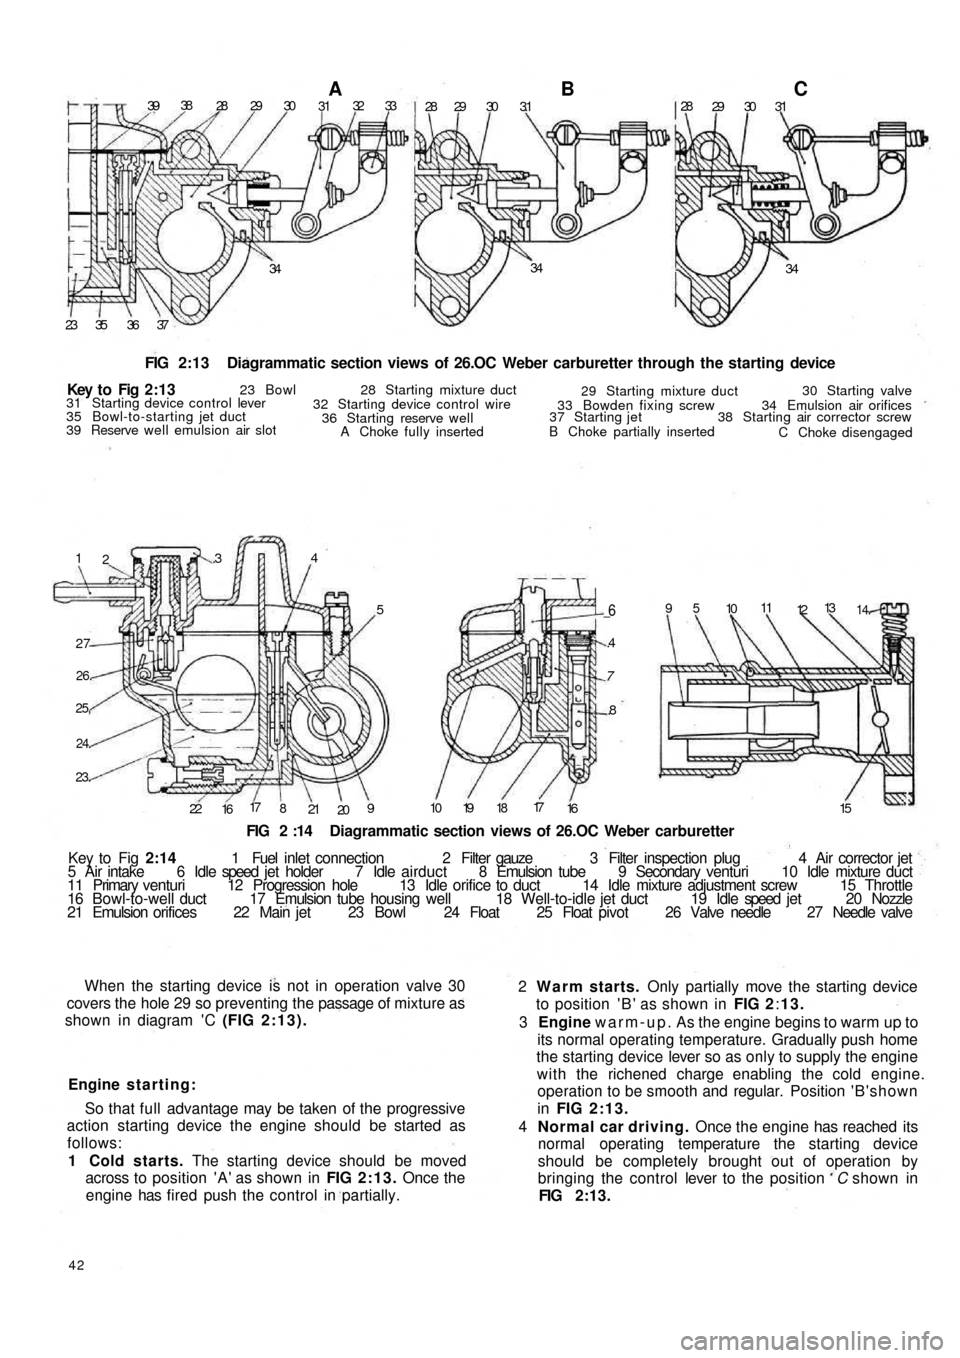 FIAT 500 1971 1.G Workshop Manual 3938
28 29 30A3132 33
28 29 30 3.1B28
29 30 31C
34 34
34
37 36 35 23
FIG 2:13  Diagrammatic section views of 26.OC Weber carburetter through the starting device
1
2.34
5
27
26.
25,
24.
23.
22
1617
8
2